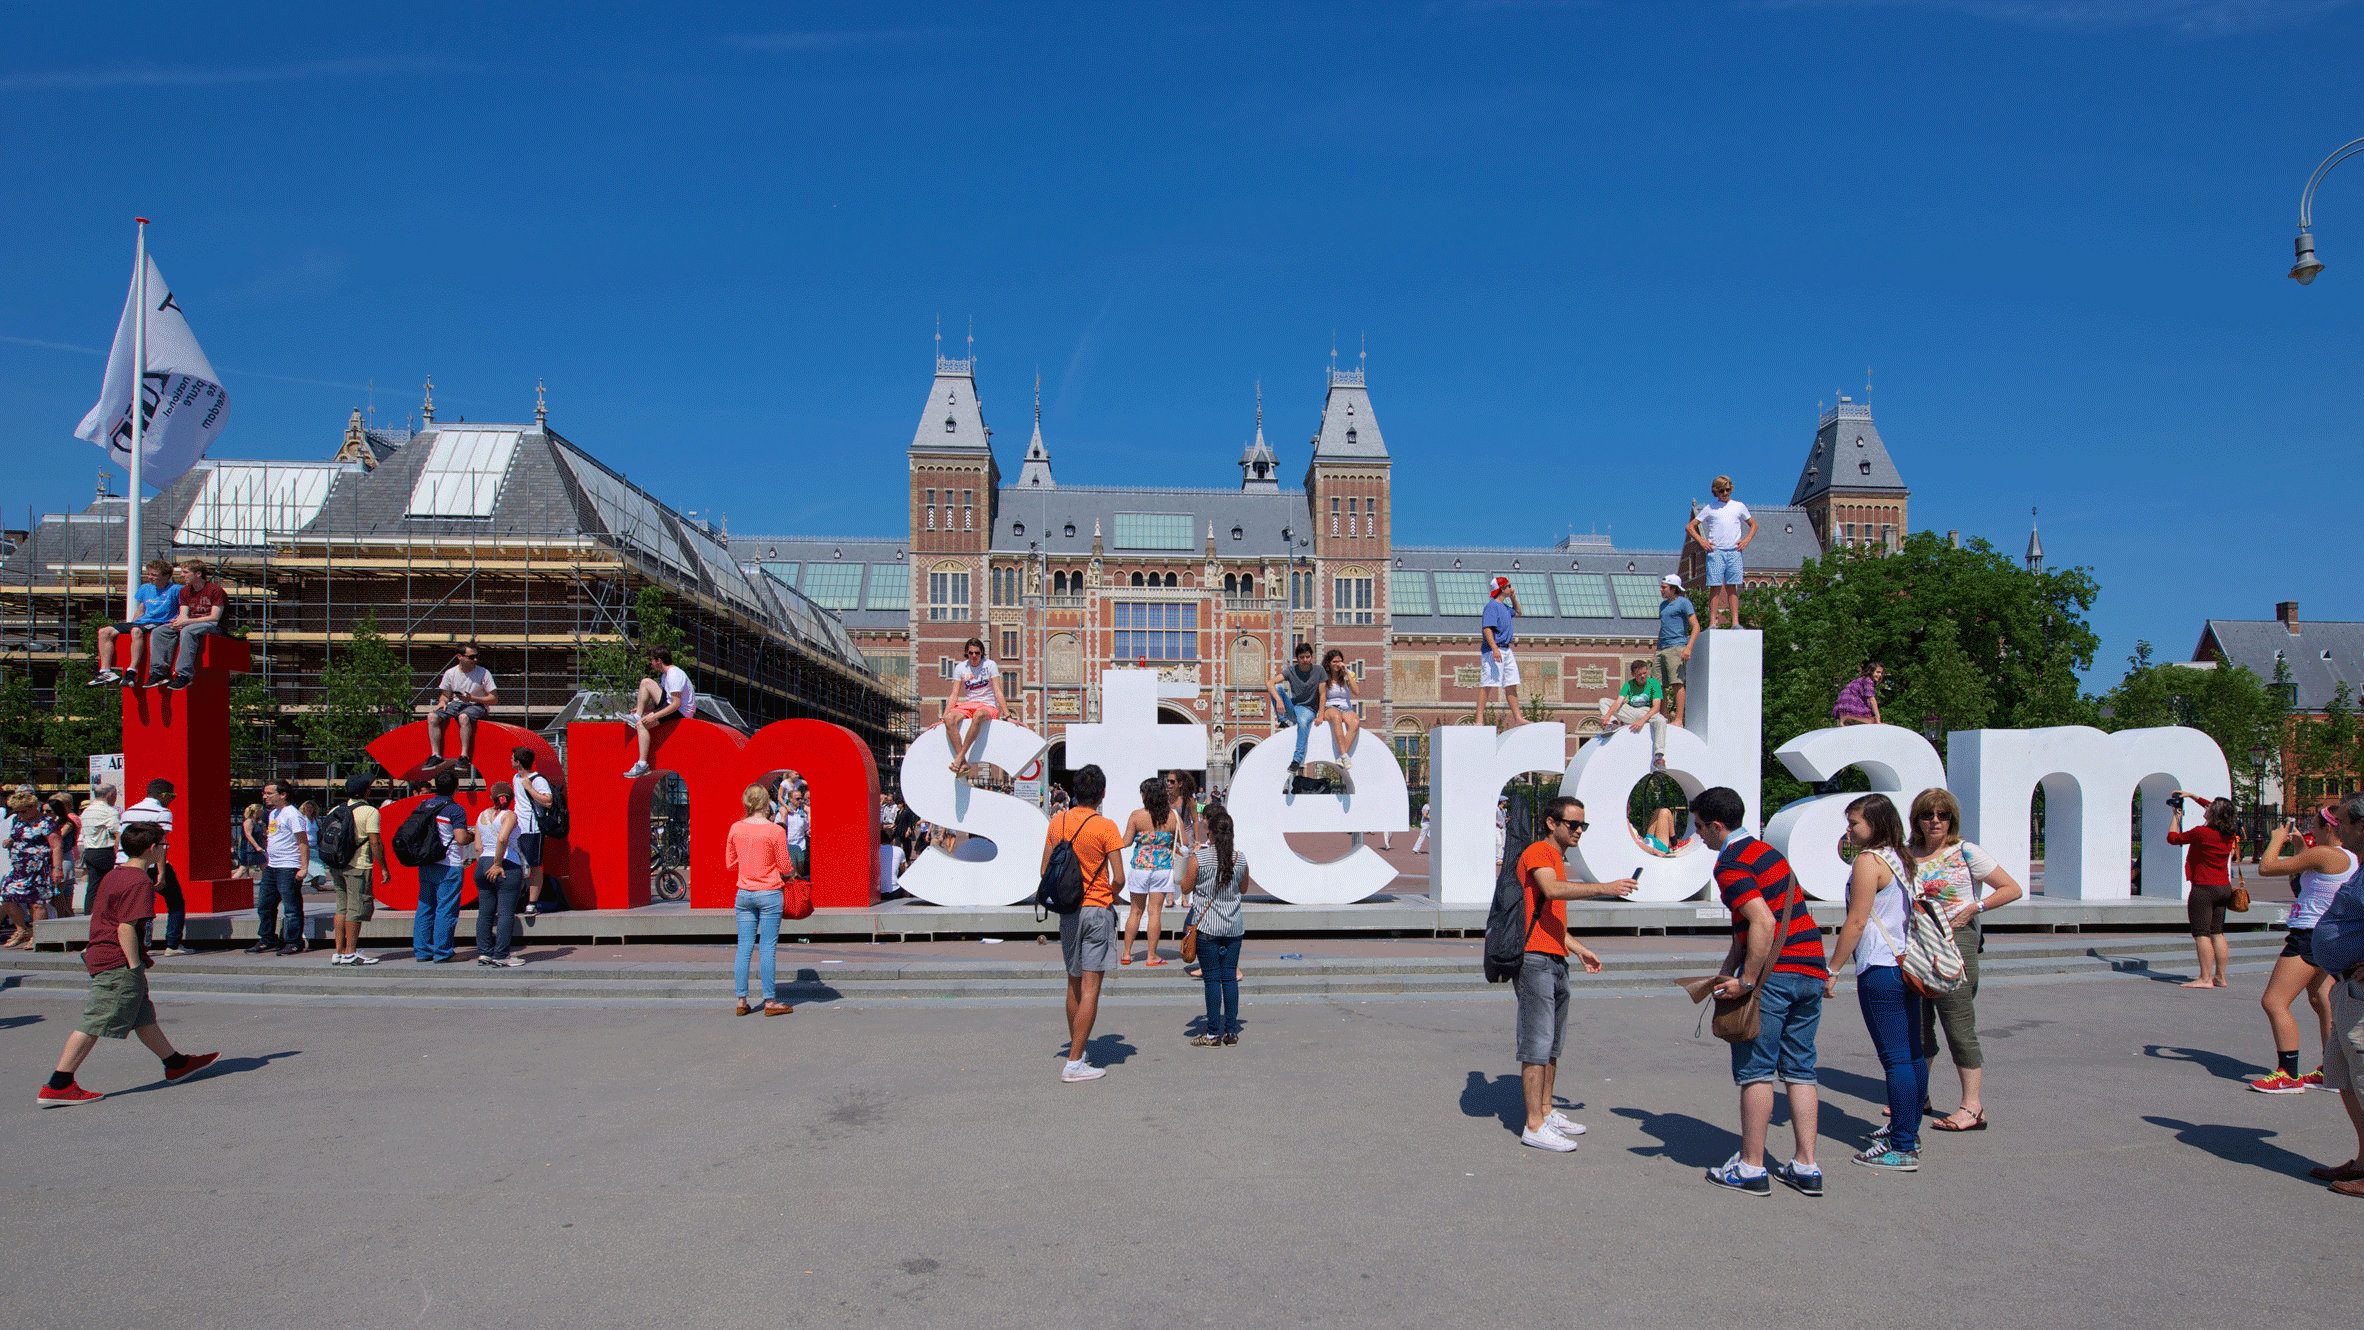 volwassen voorwoord Gymnast Council removes "I amsterdam" sign after it becomes selfie spot